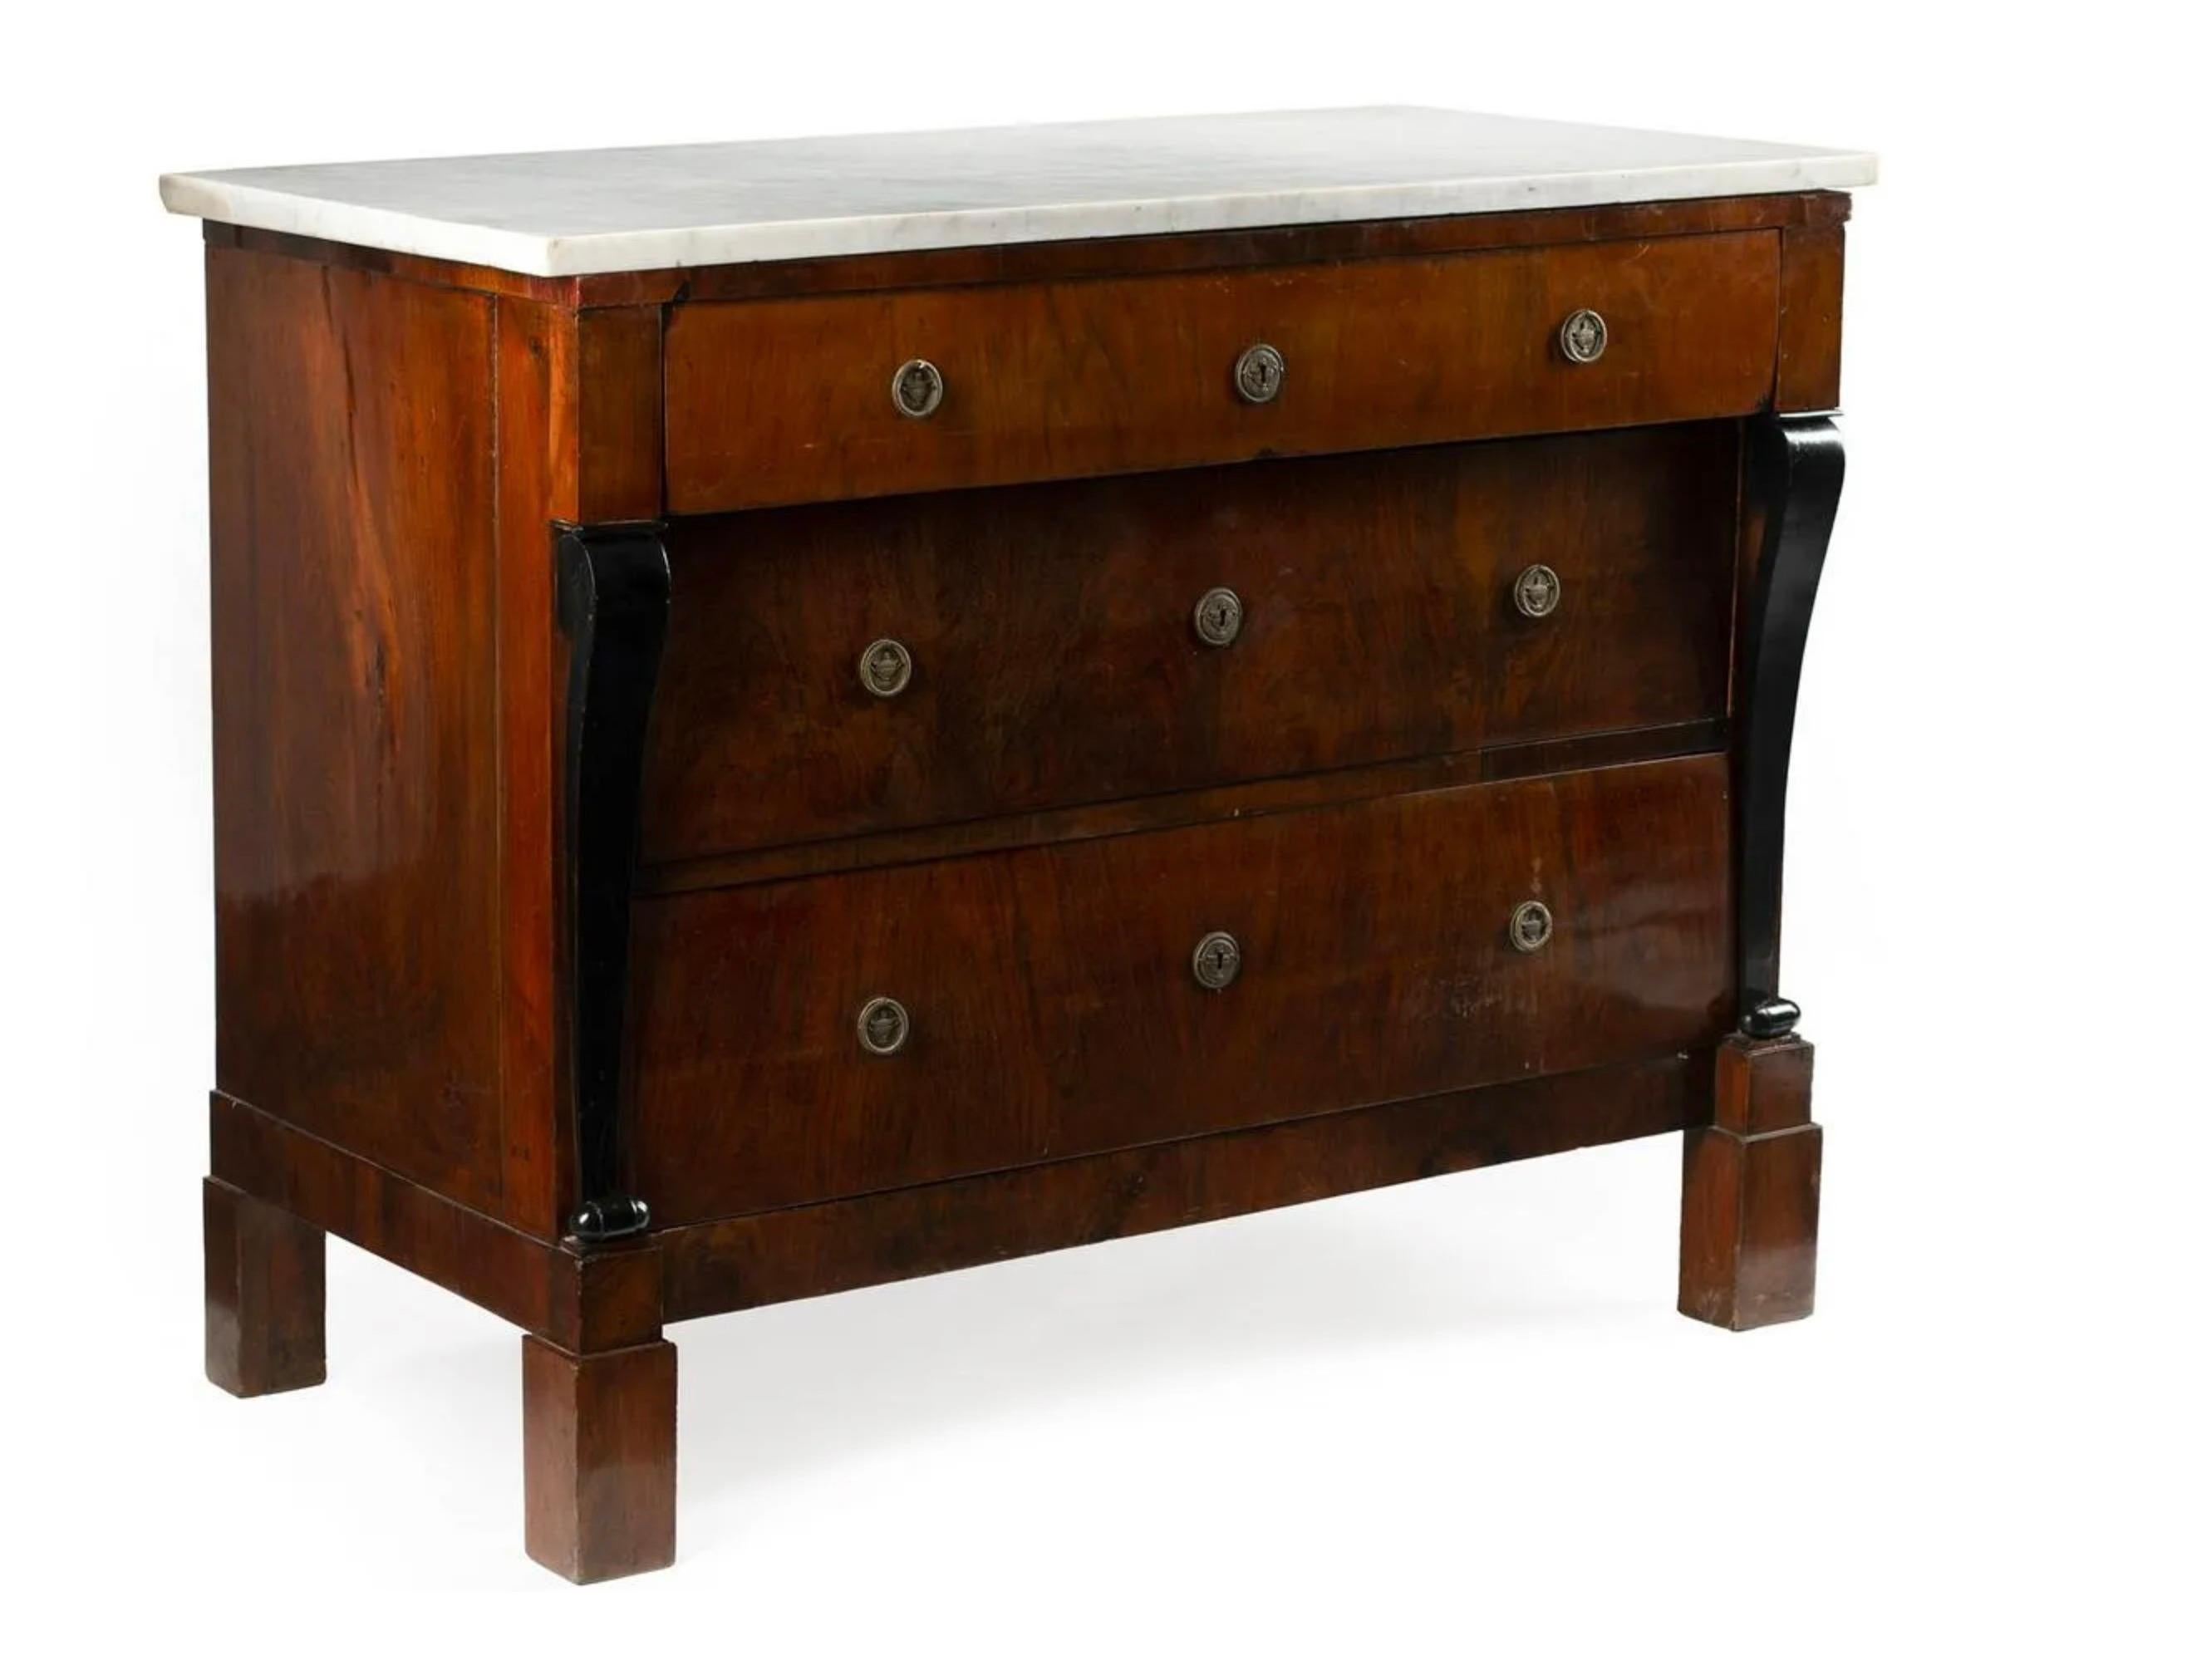 Antique French Empire-Style Parcel Ebonized Mahogany Commode, marble top, three graduated drawers, tall block feet. Elegant French commode with ebonized detailing at curved pilasters flanking the bank of three drawers. Original pulls and white